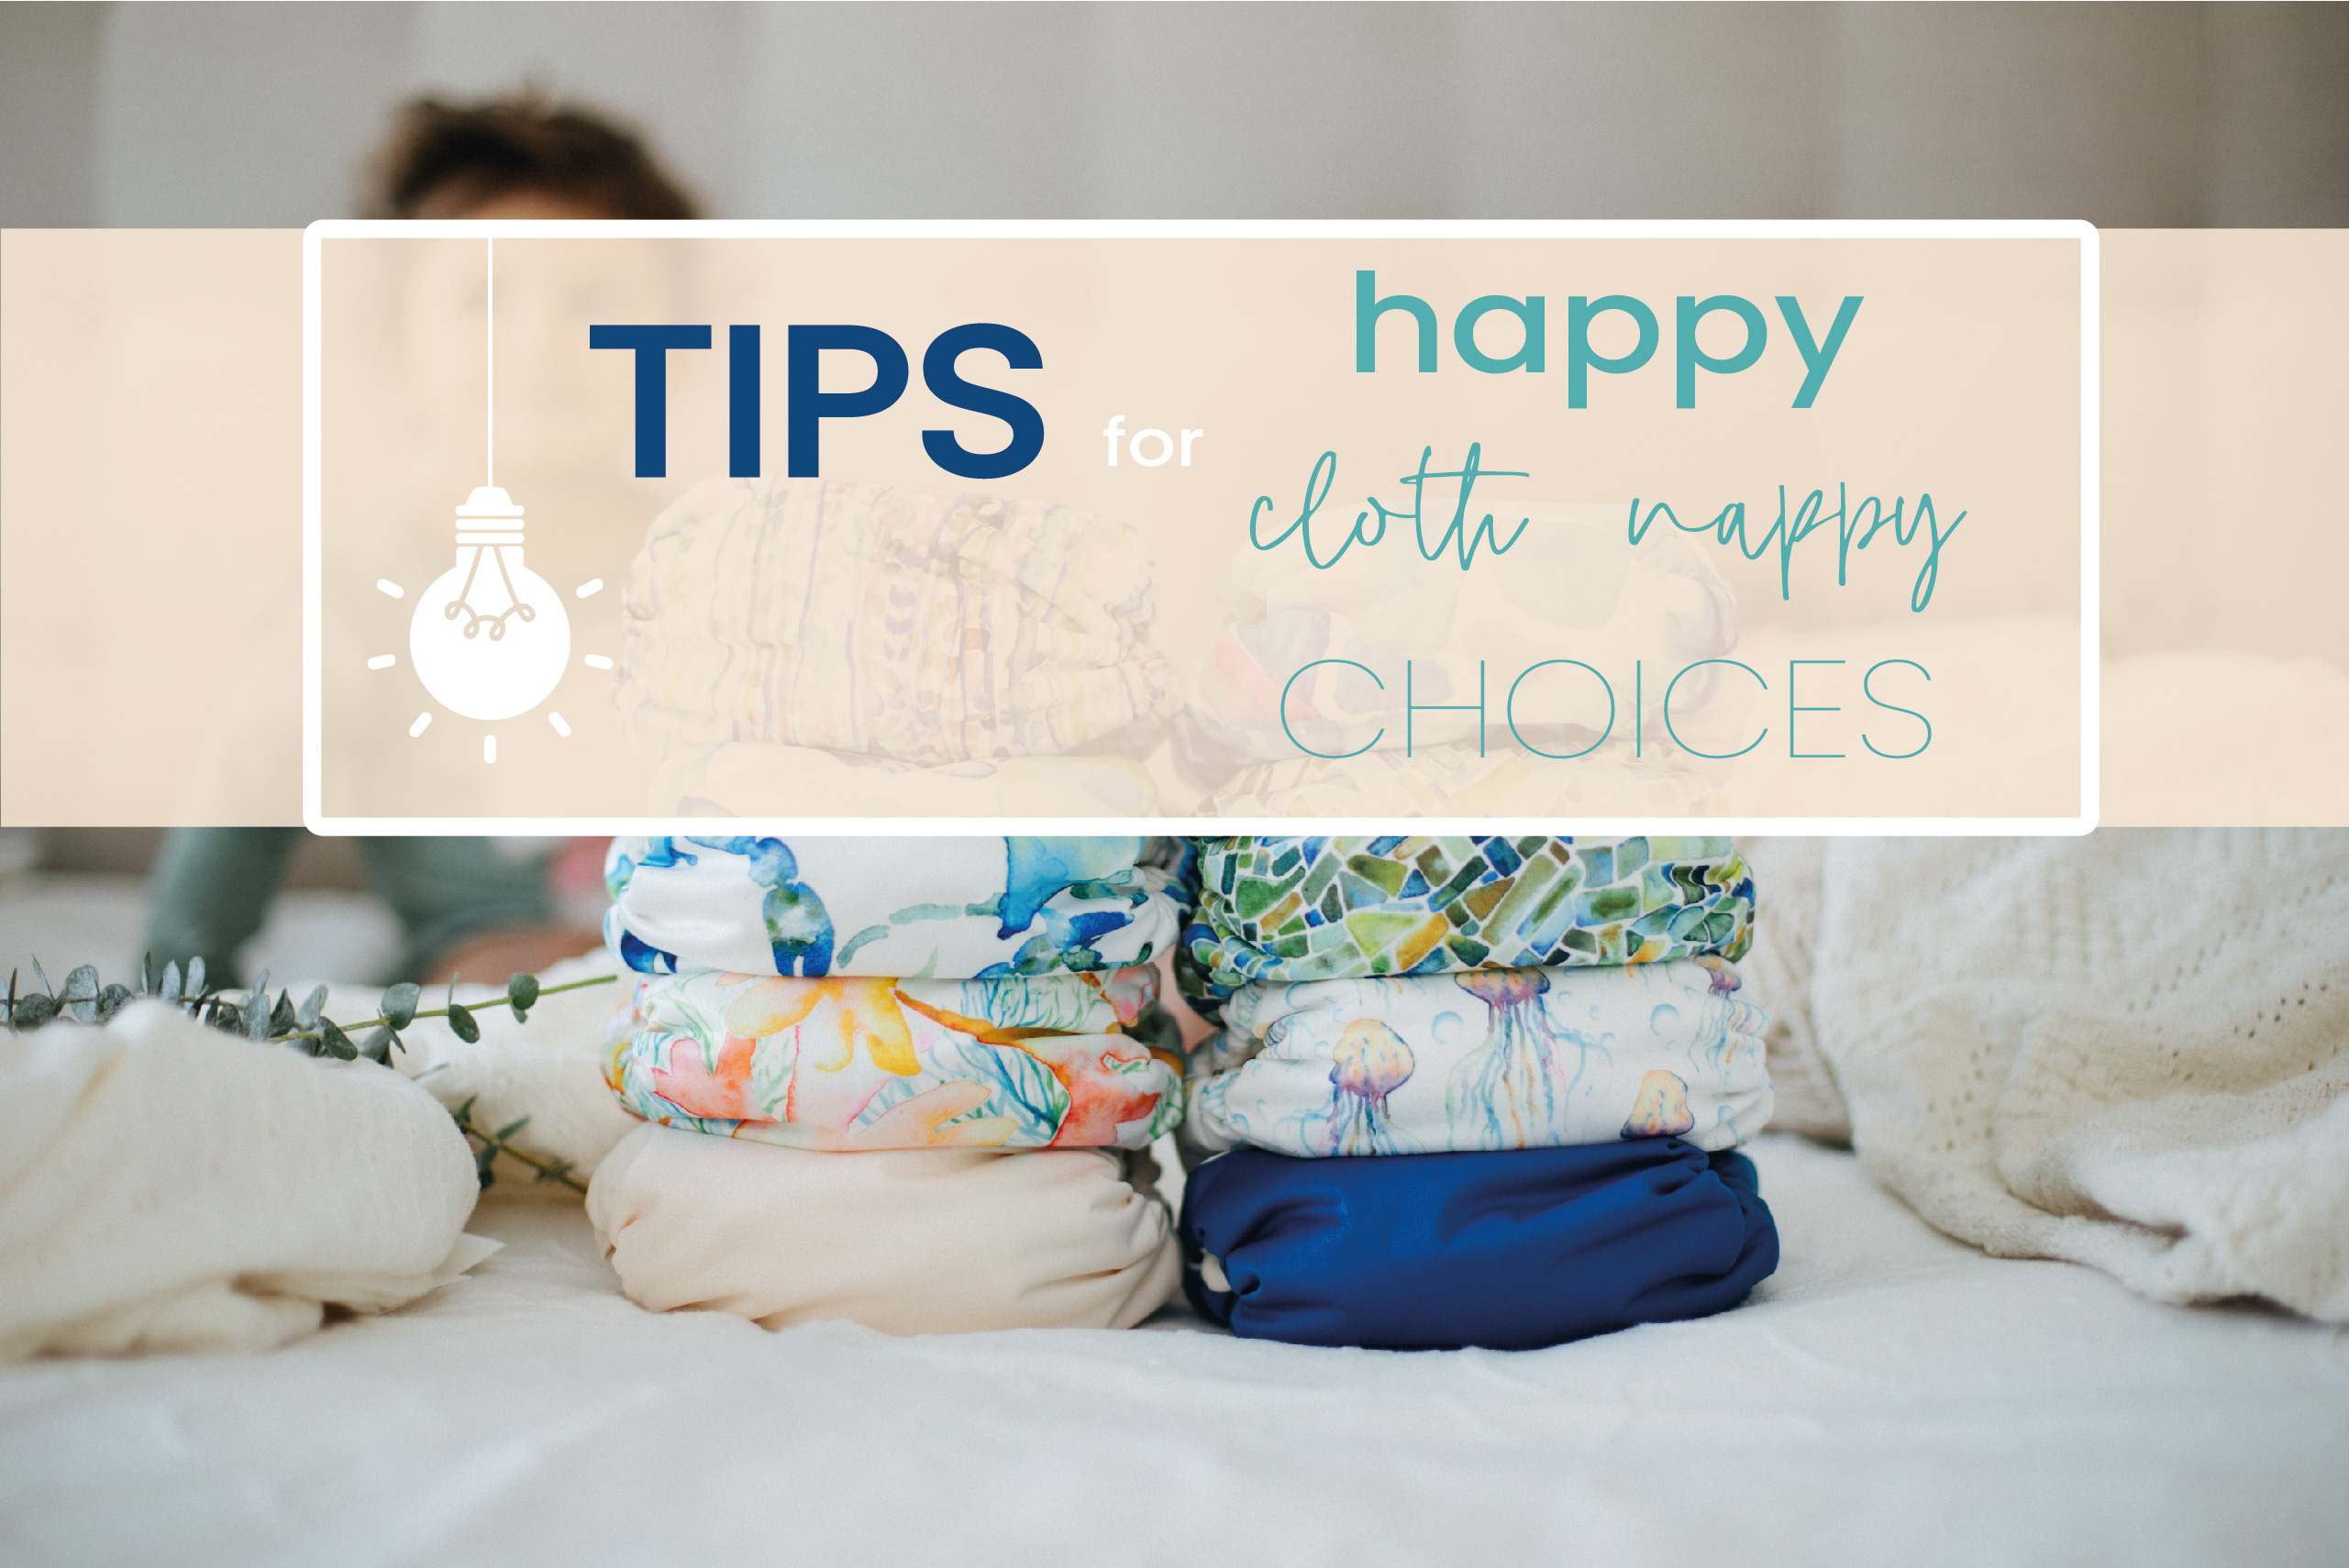 Best tips for the cloth nappies beginners